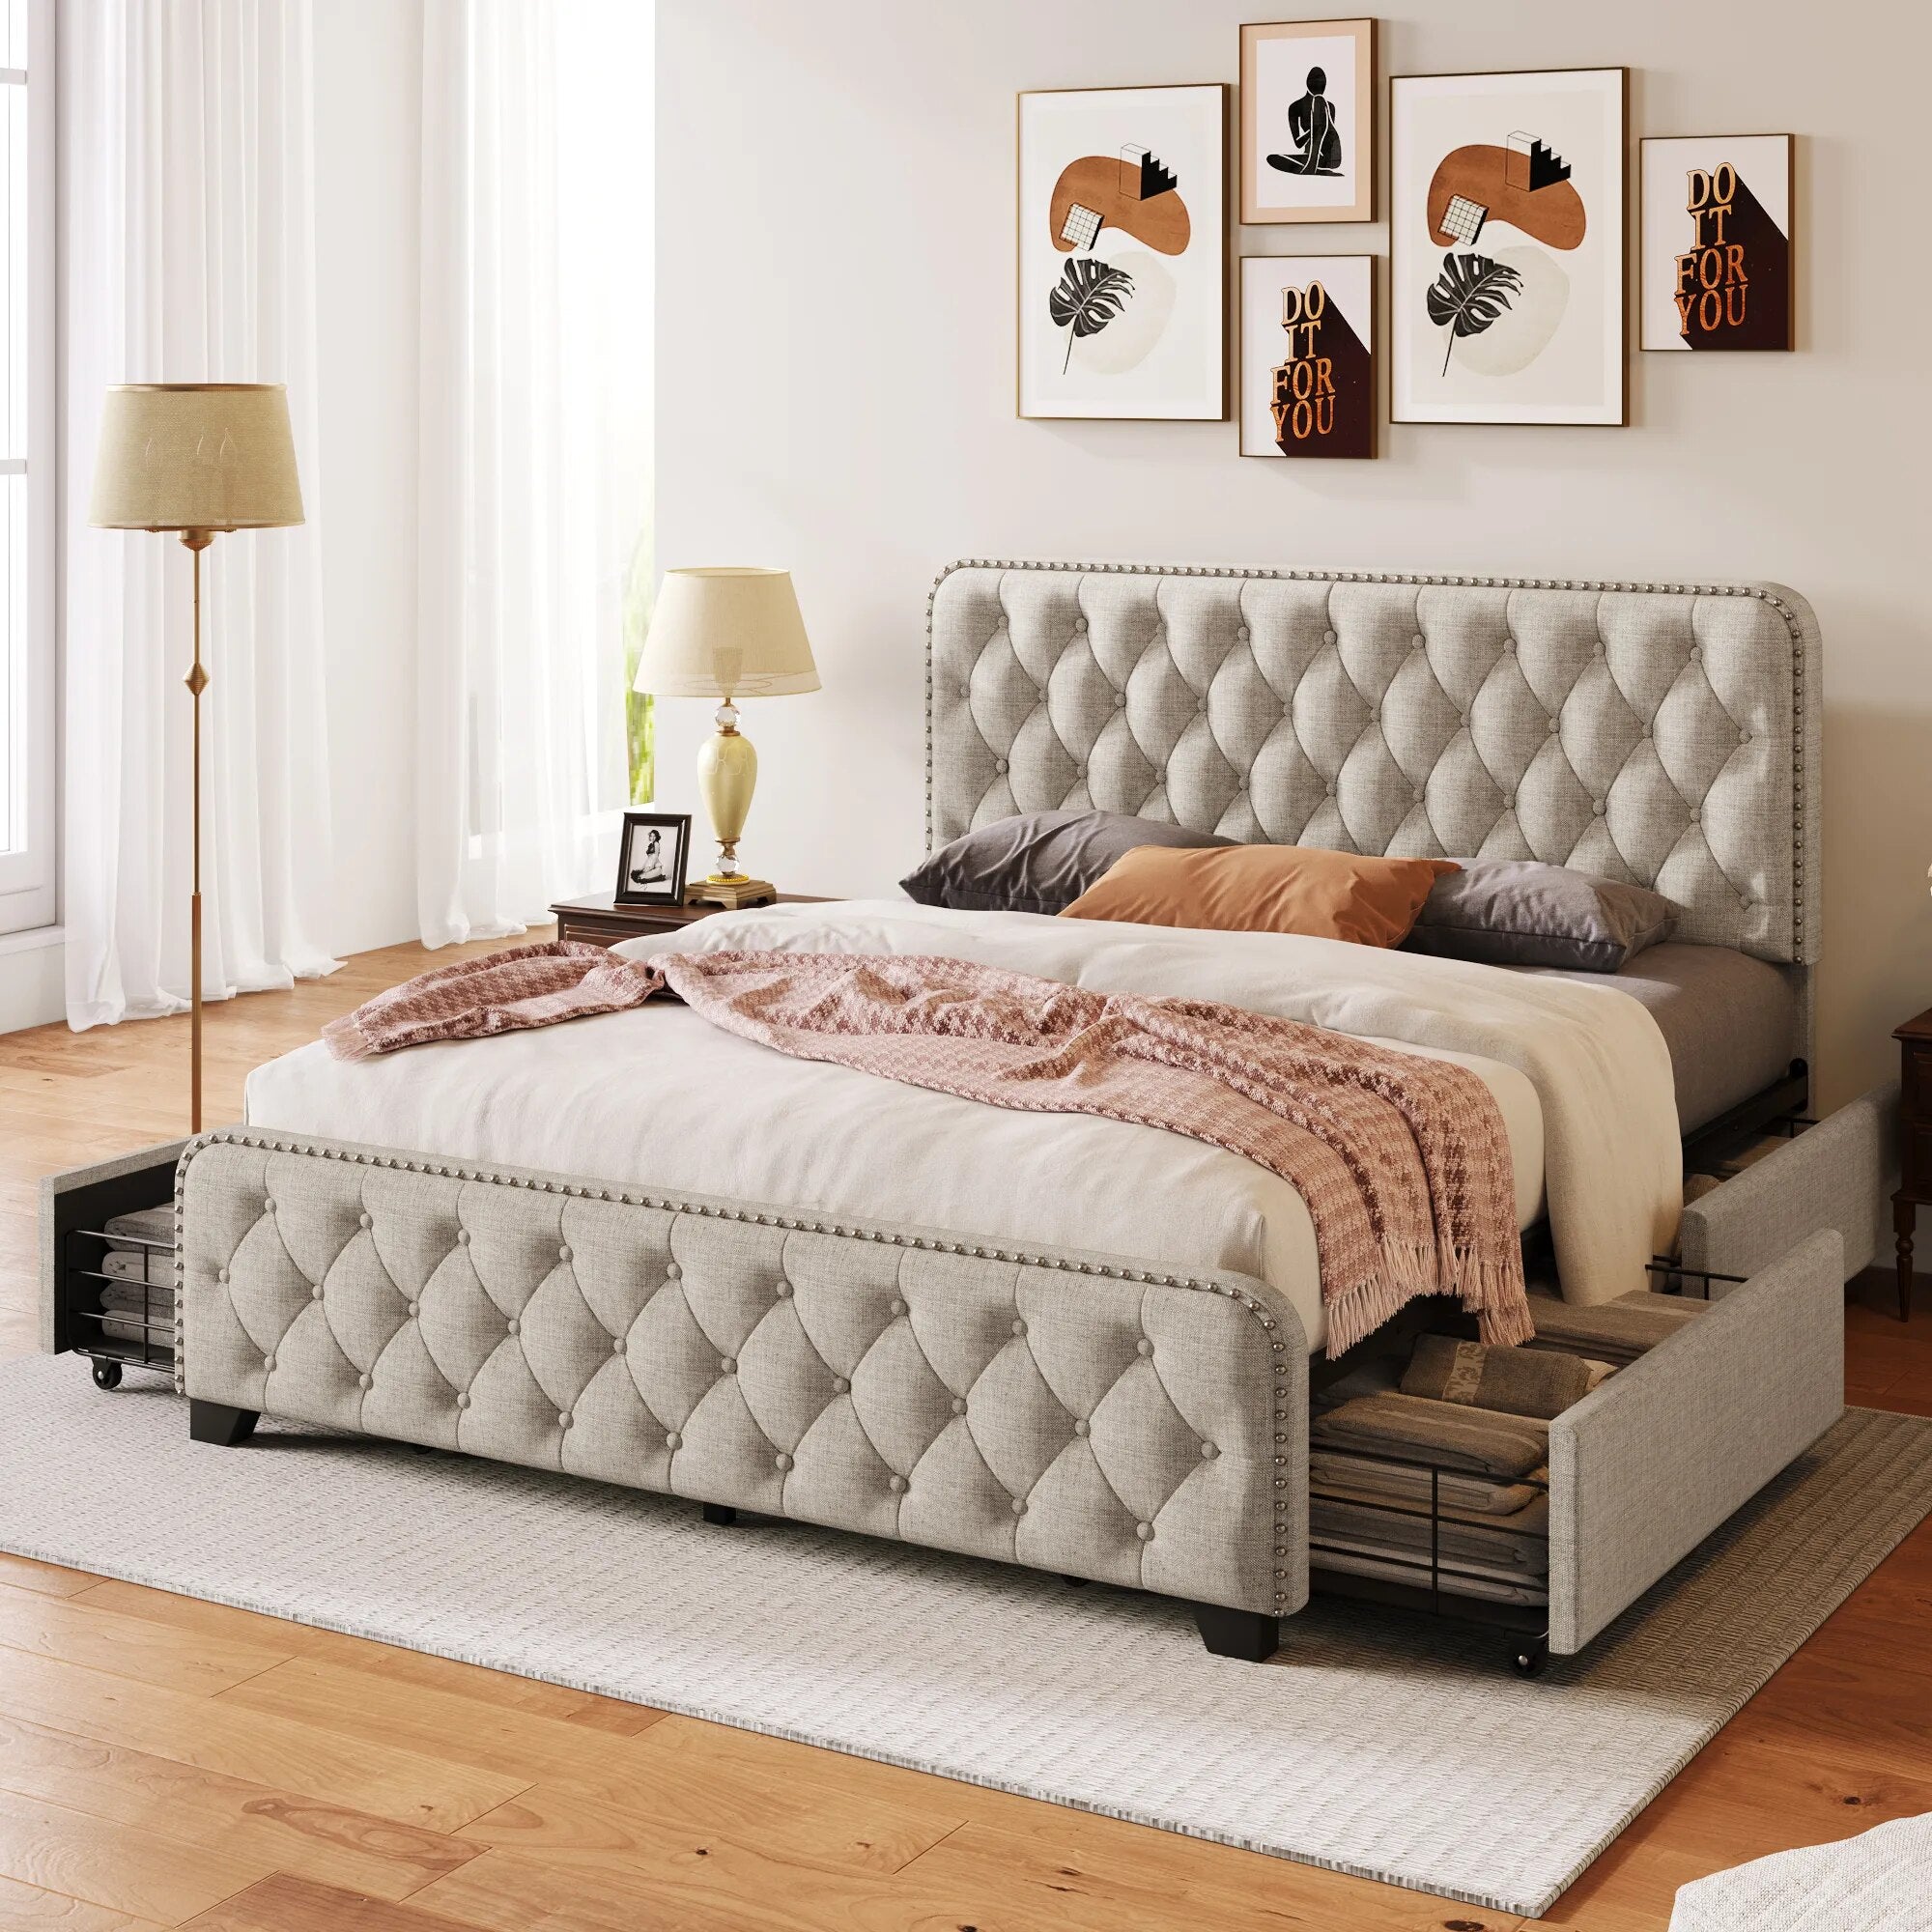 Four Drawers Button Tufted Headboard Footboard Metal Bed Frame